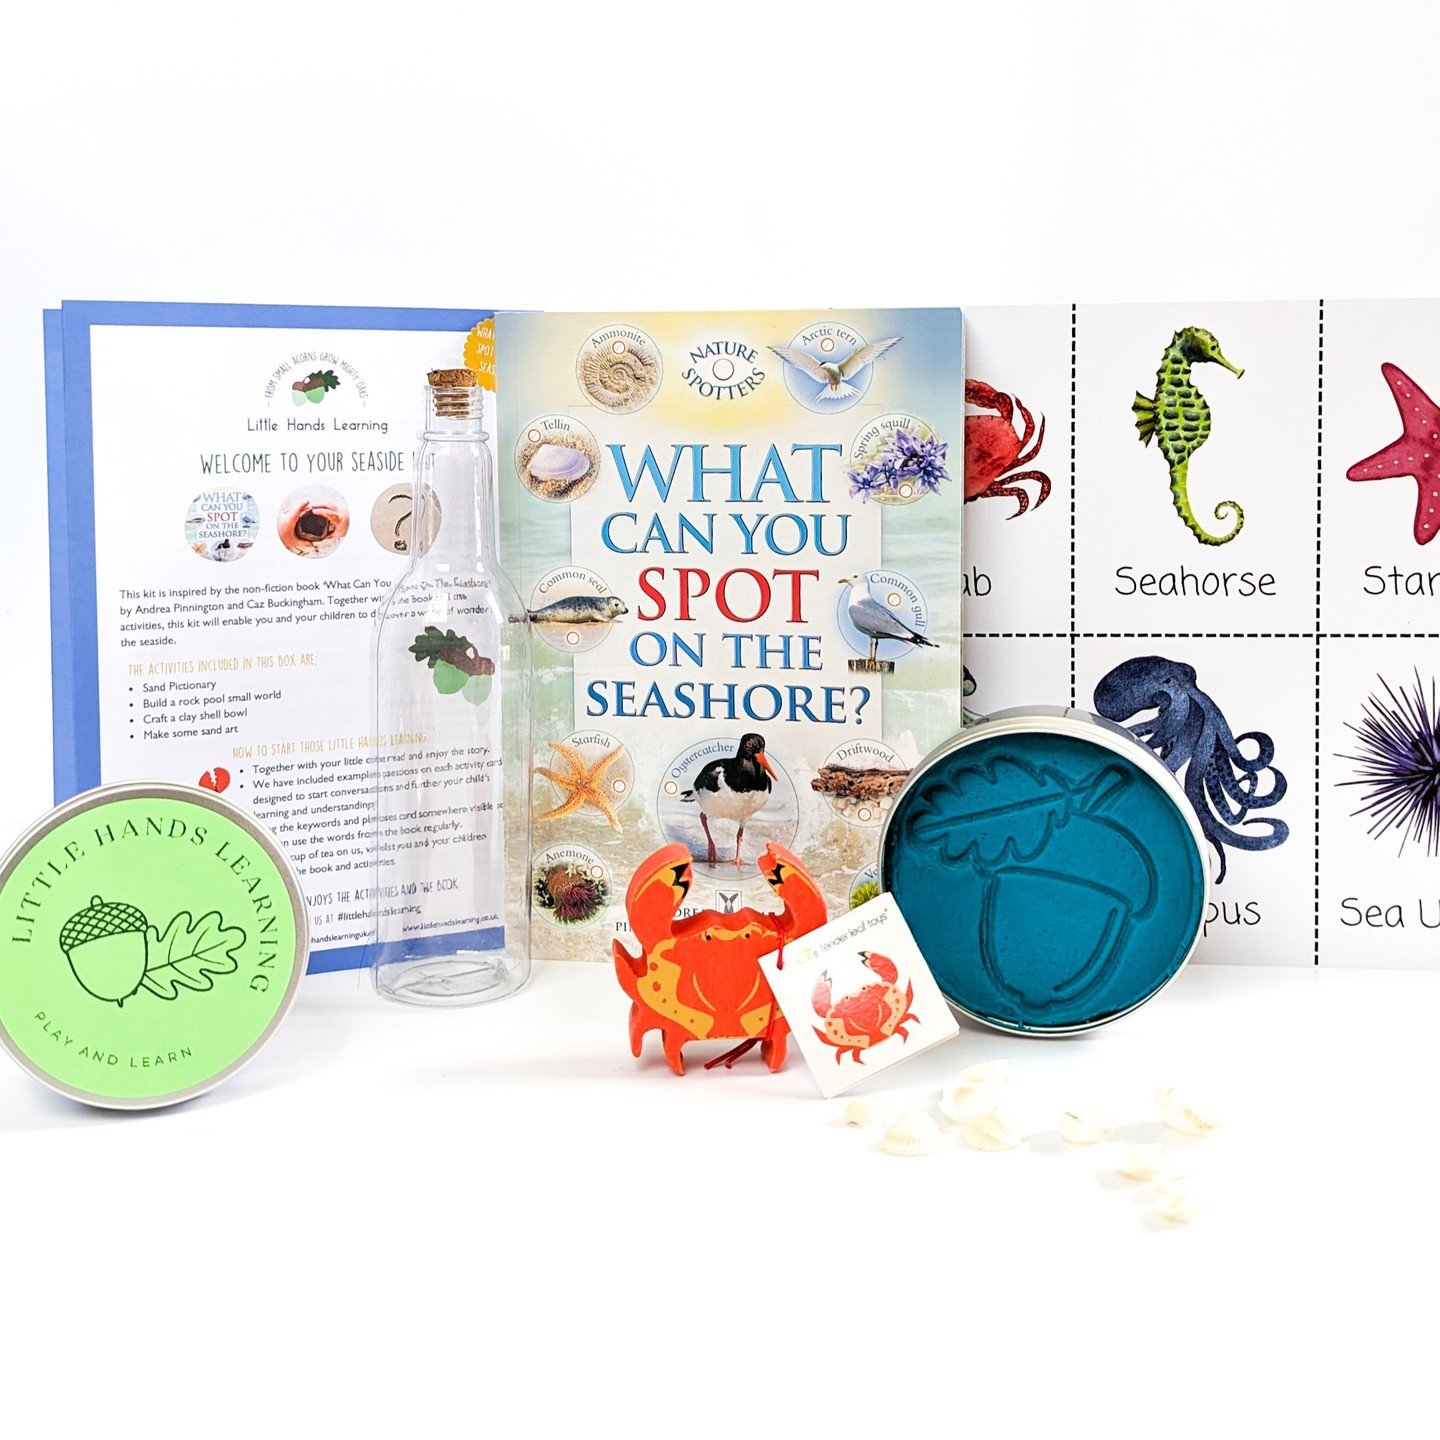 This May visit the seaside to discover a world of wonder at along the seashore!

From scavenger hunts, to creating seashell masterpieces, and playing sand Pictionary this Seaside Book and acitivity kit promises endless hours of entertainment and lear